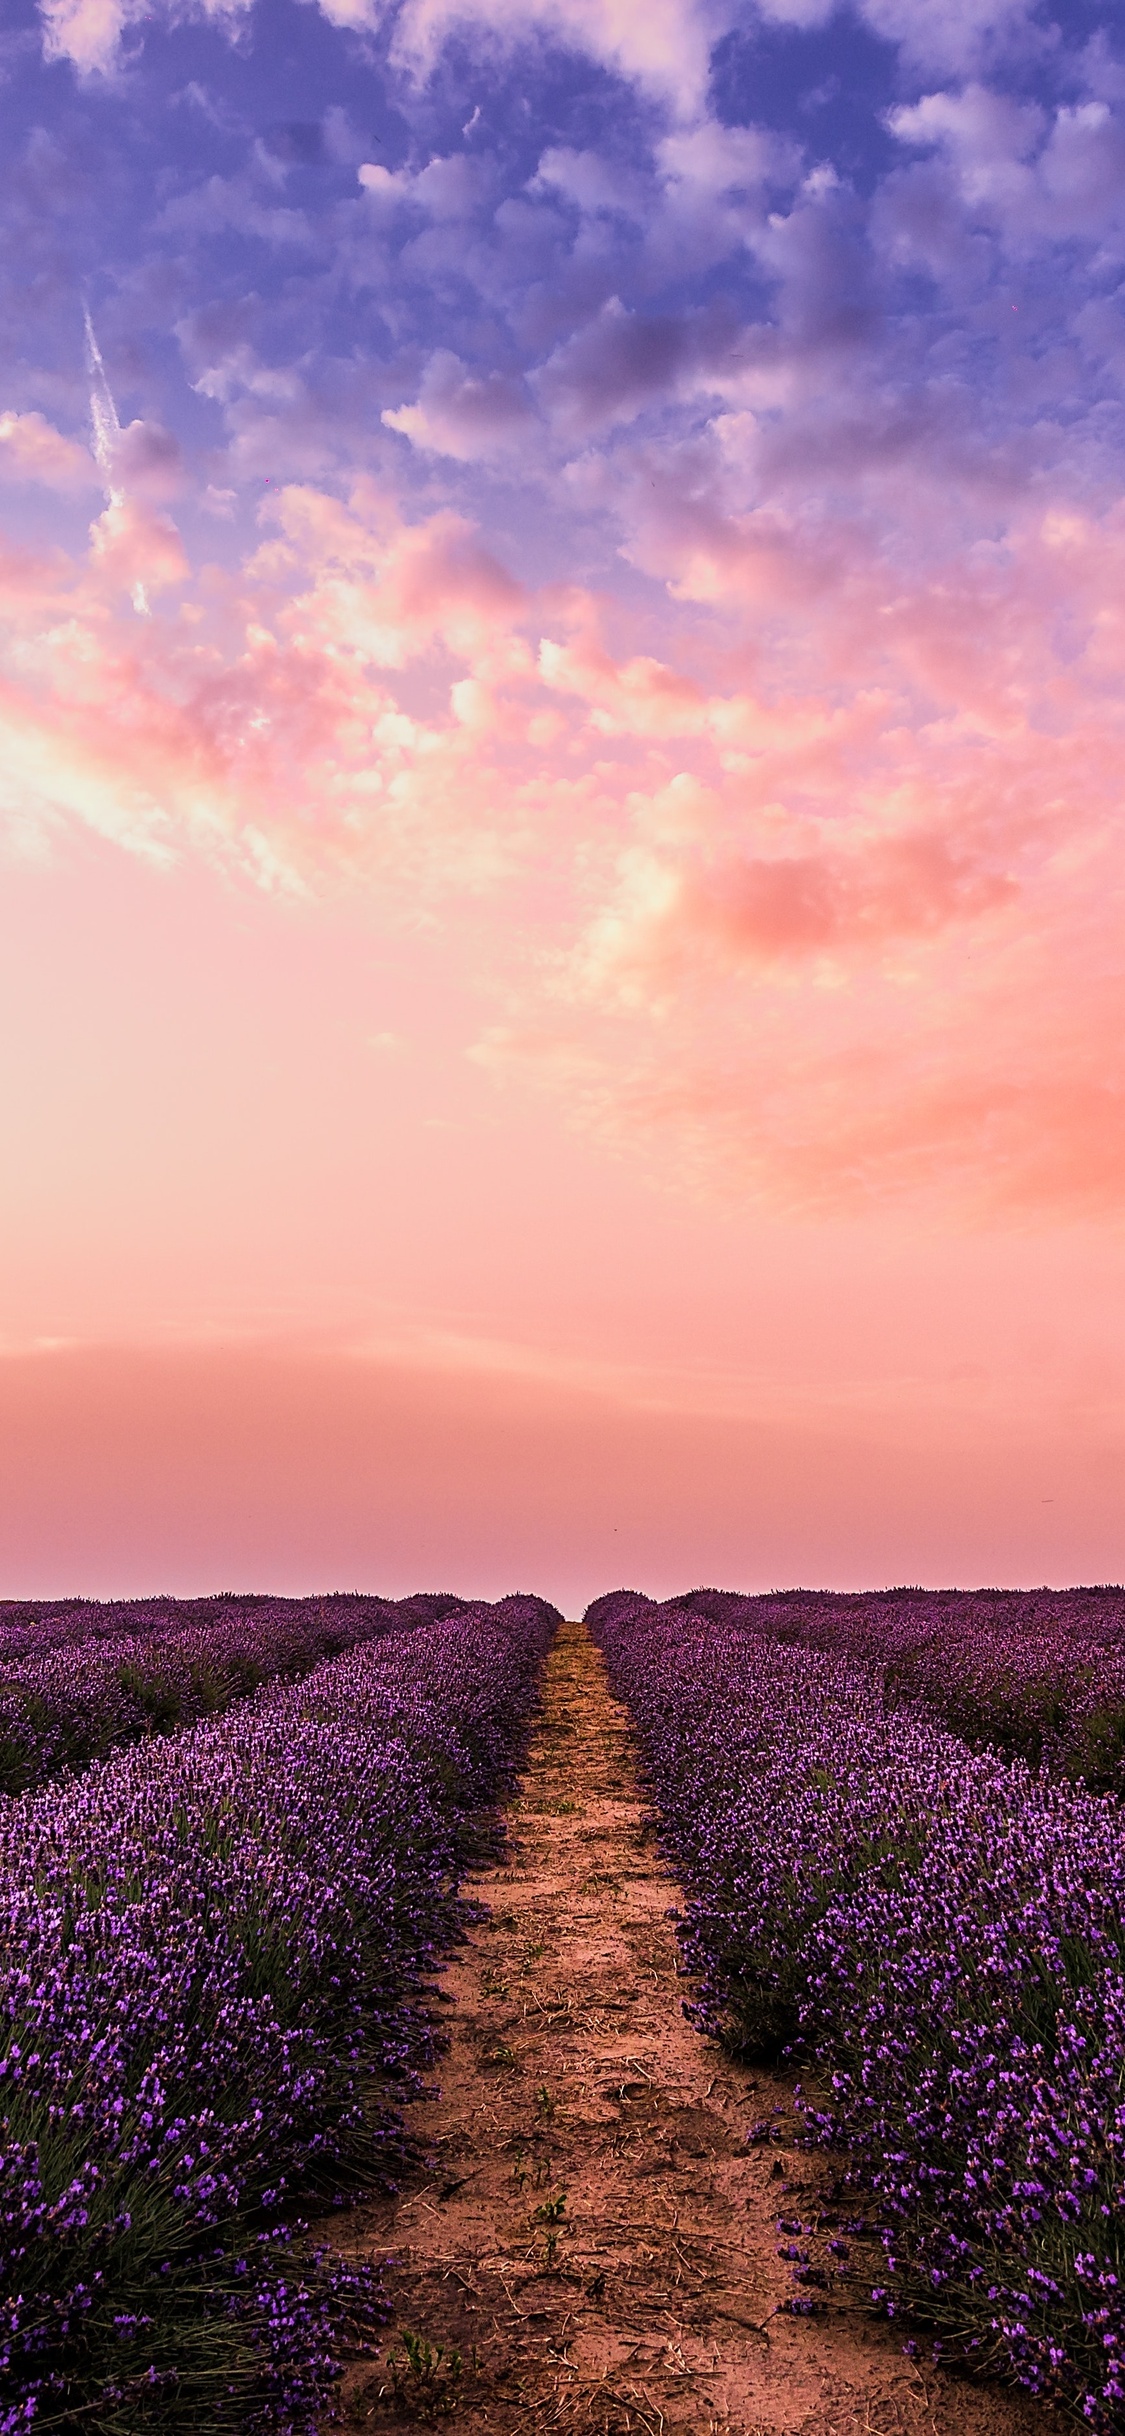 94200 Lavender Field Stock Photos Pictures  RoyaltyFree Images   iStock  Woman lavender field Woman in lavender field Lavender field  france